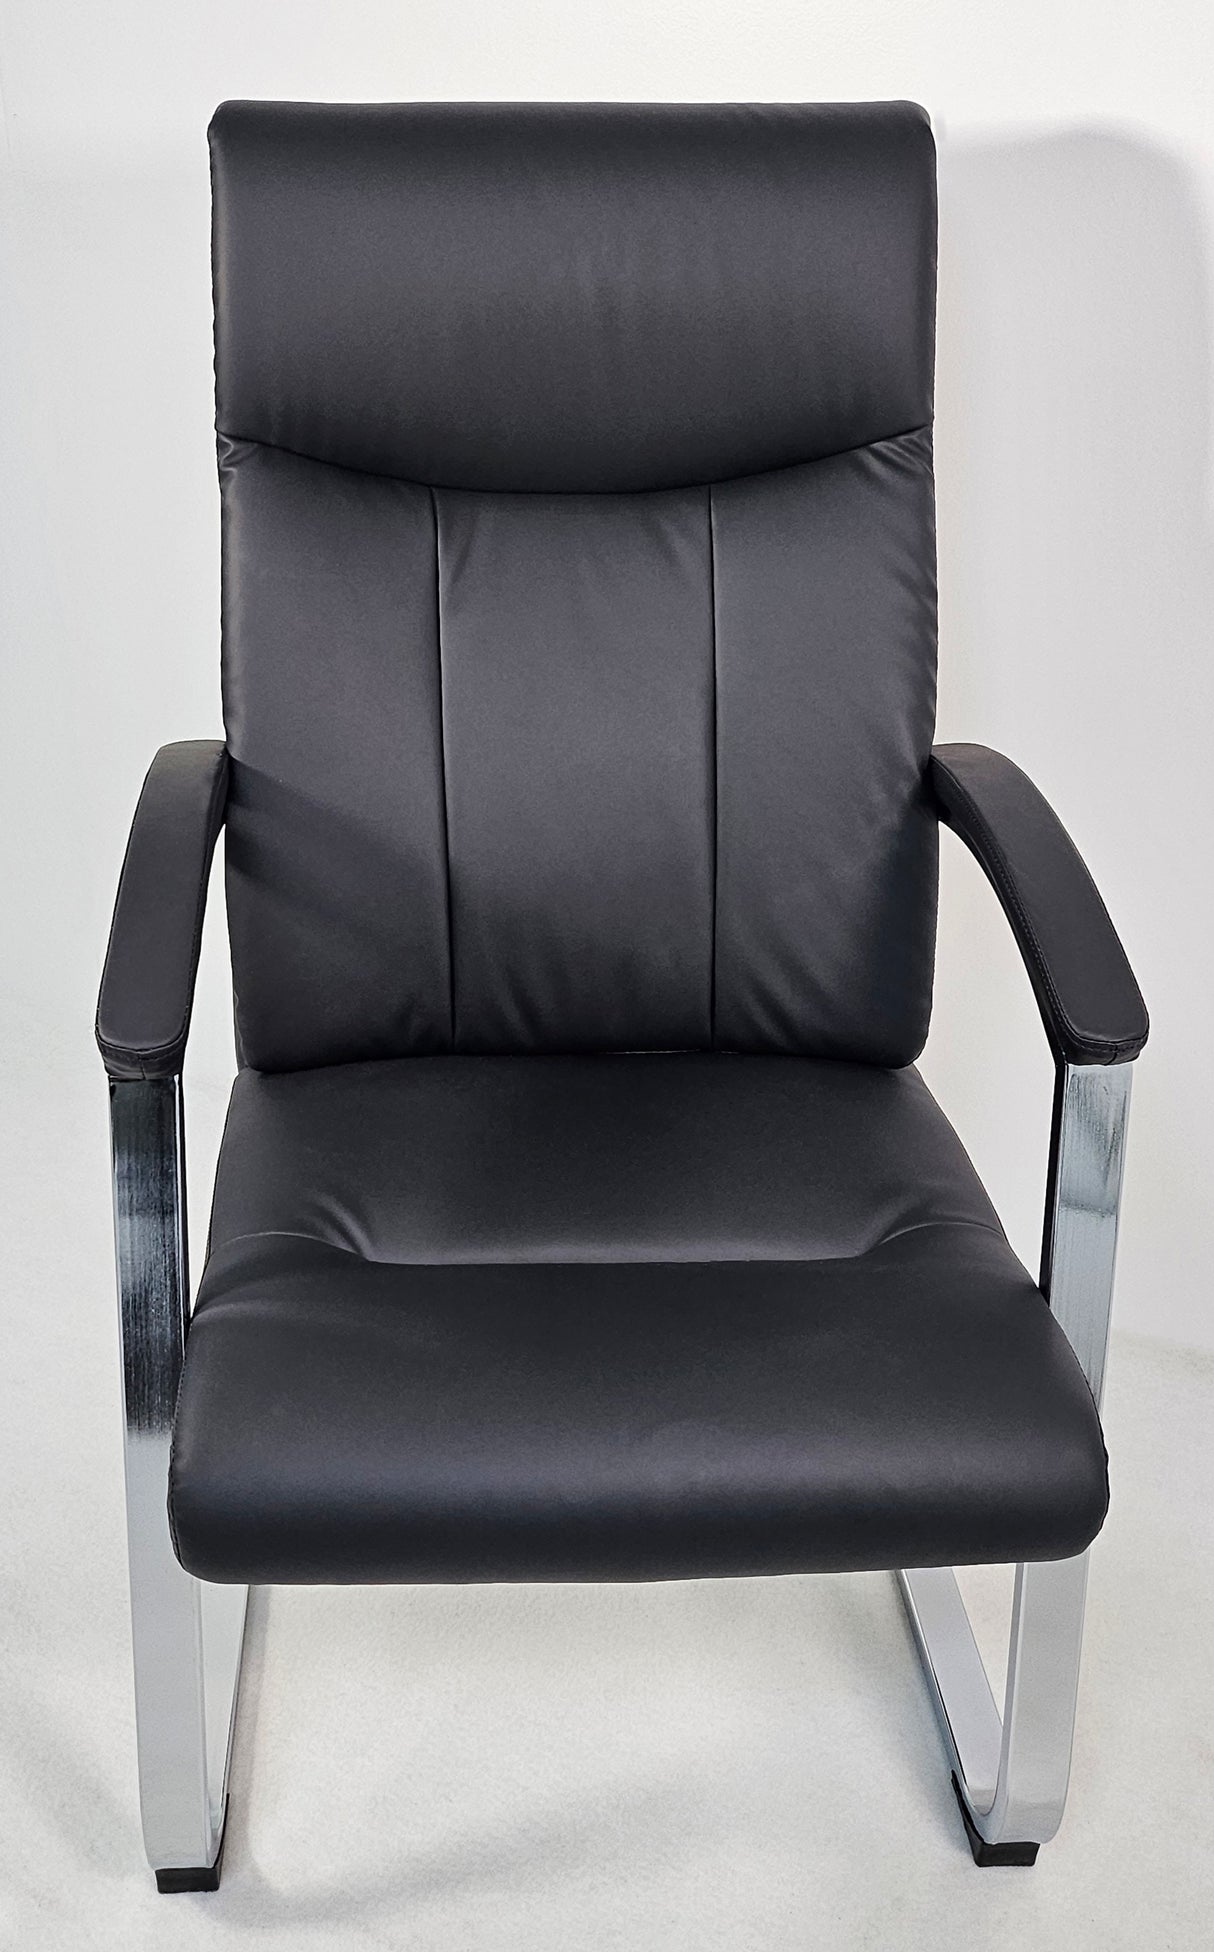 Modern Chrome and Black Leather Executive Visitor Chair - FE-202